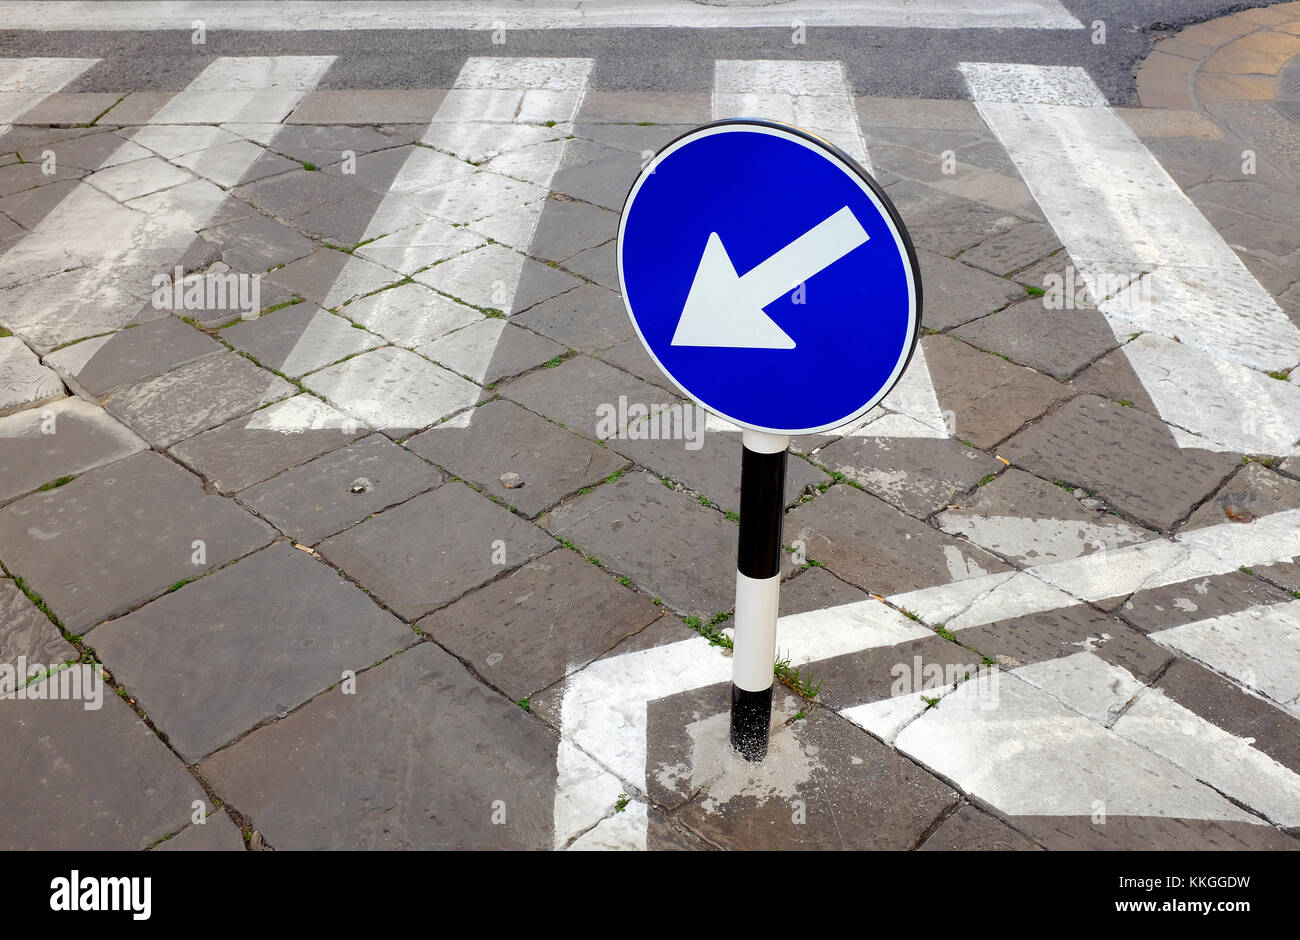 directional arrow on road crossing, florence, italy Stock Photo